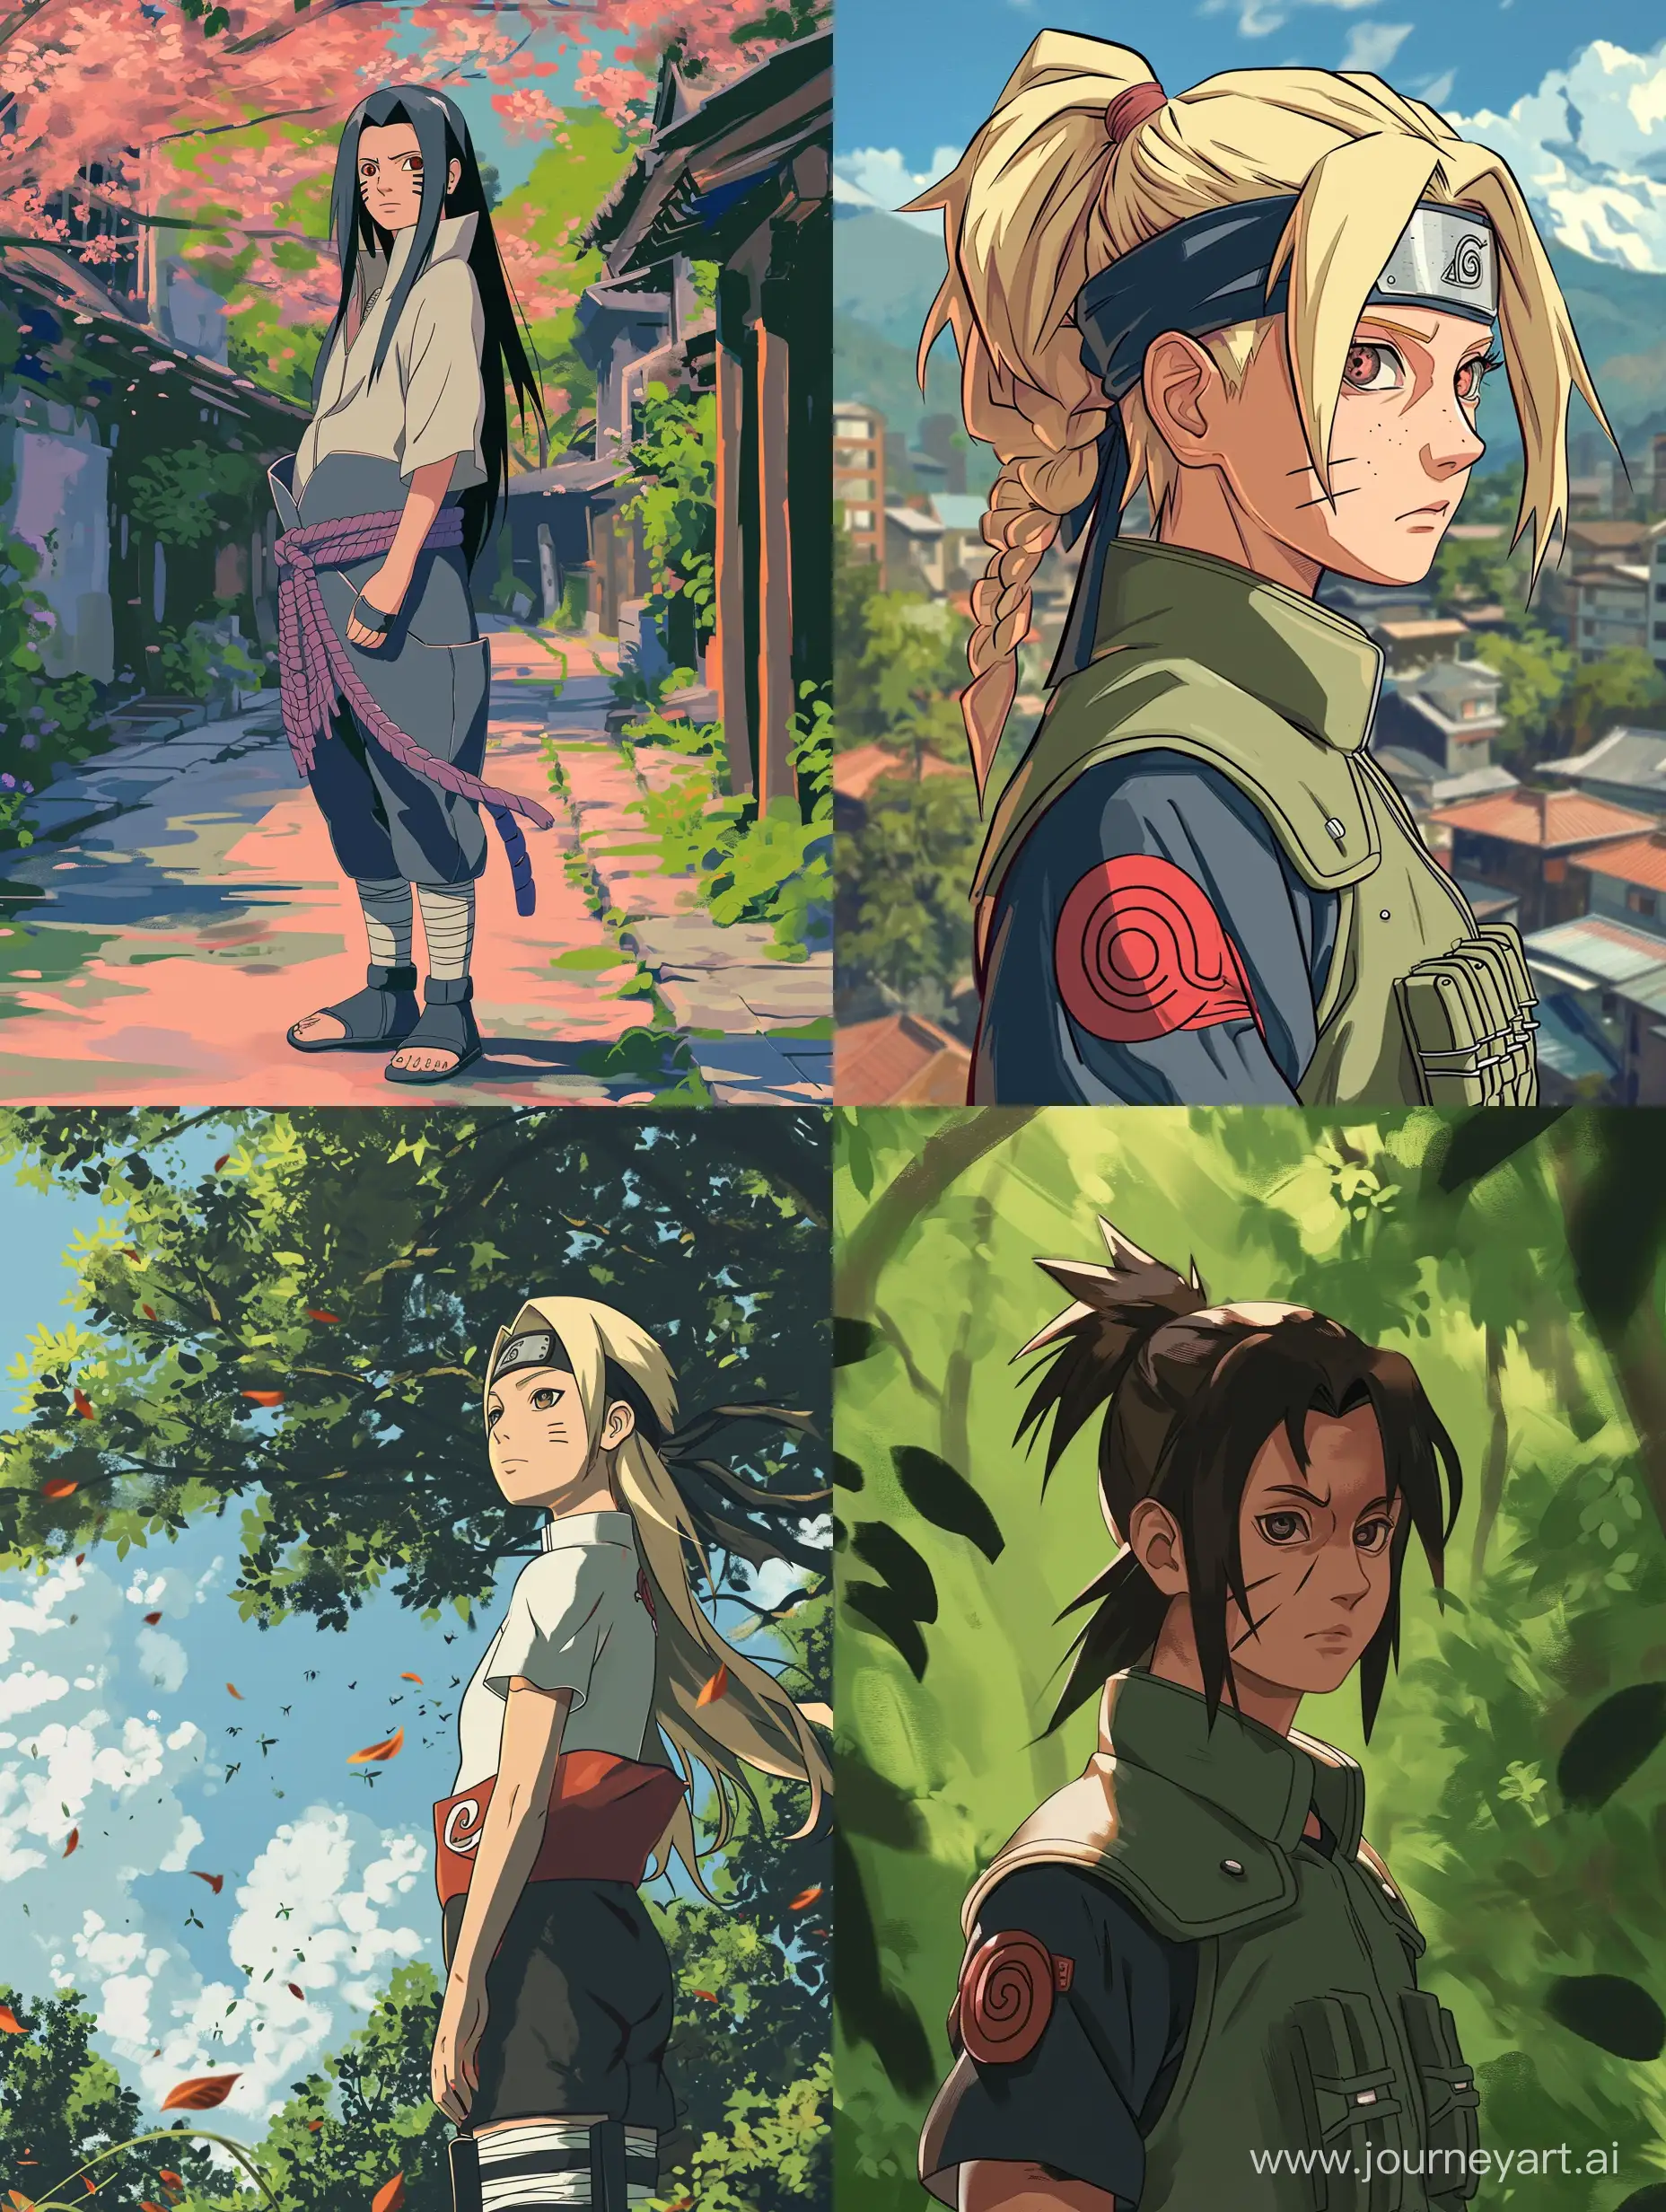 A picture of Konoha inspired by Studio Ghibli Art Style